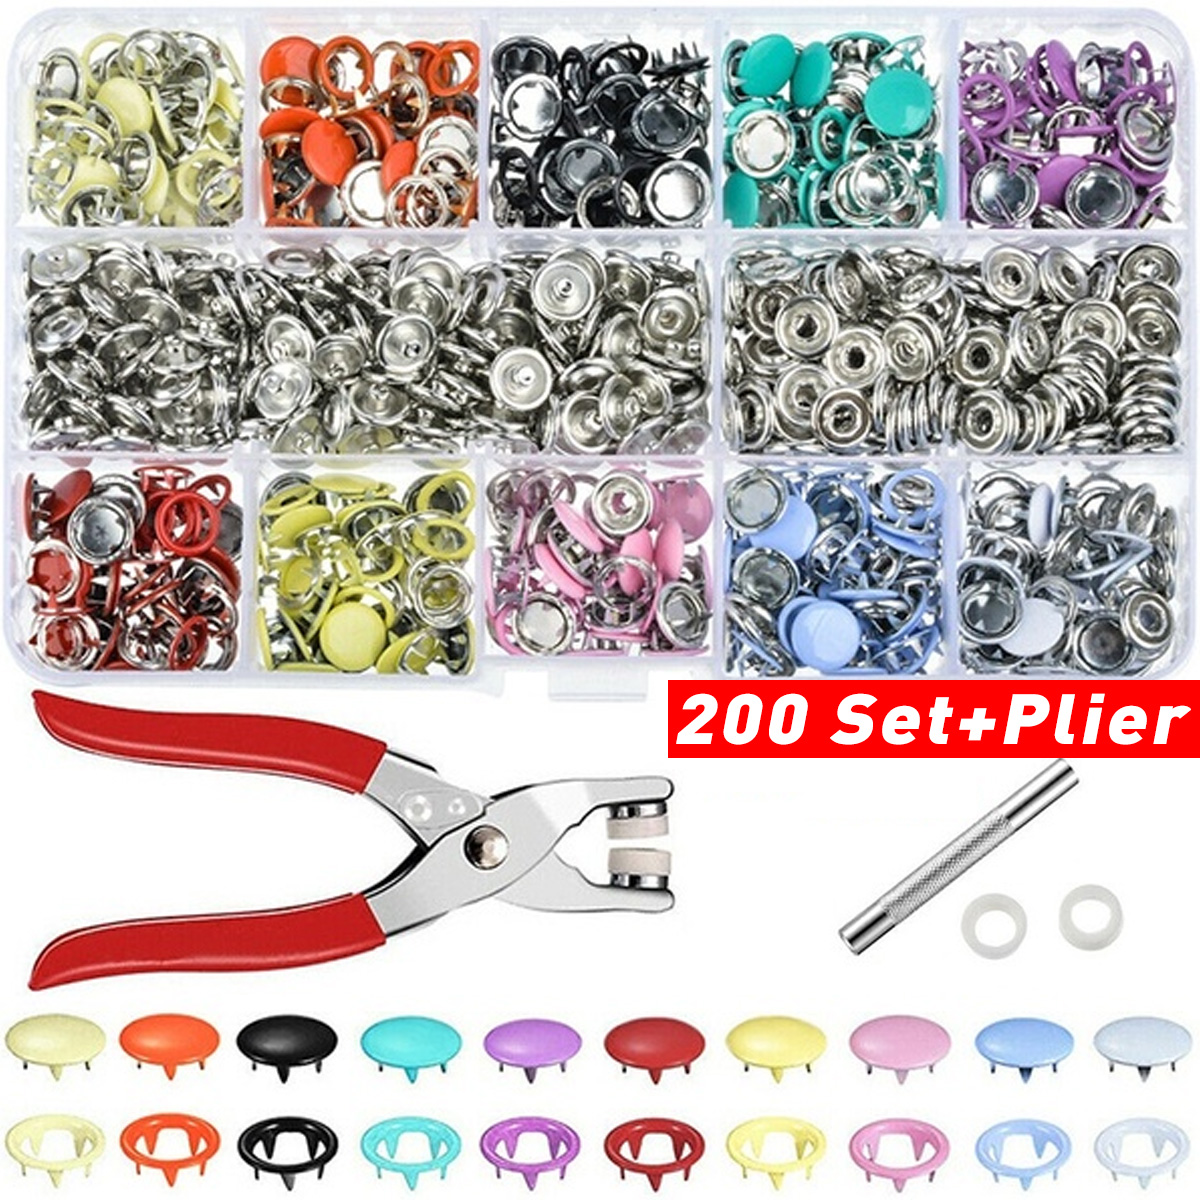 100200-Sets-DIY-Press-Studs-Tools-Kit-Assorted-Colors-Snap-Metal-Sewing-Buttons-1618875-4